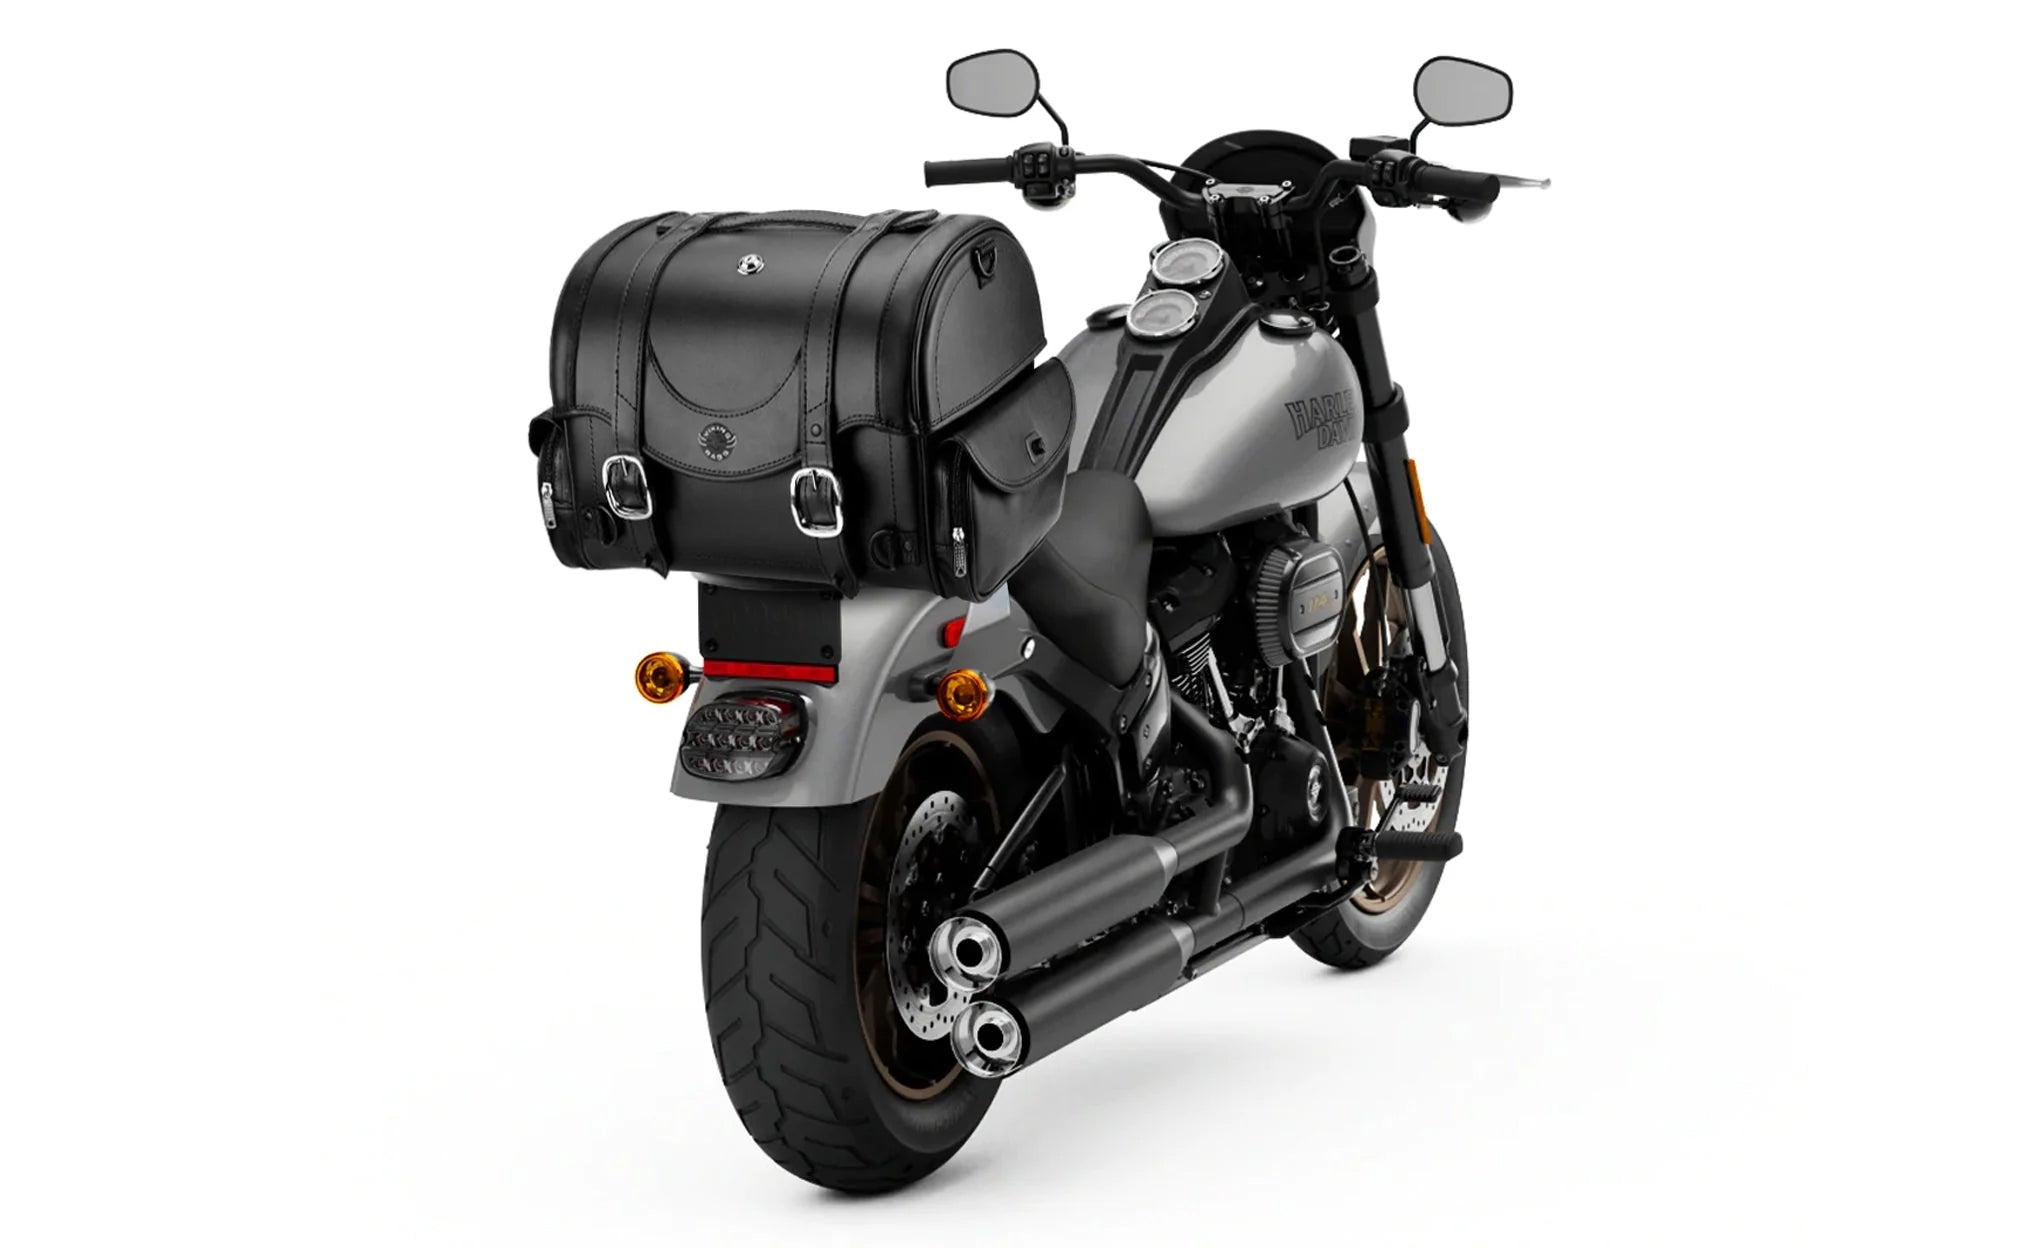 21L - Century Medium Indian Leather Motorcycle Tail Bag on Bike Photo @expand